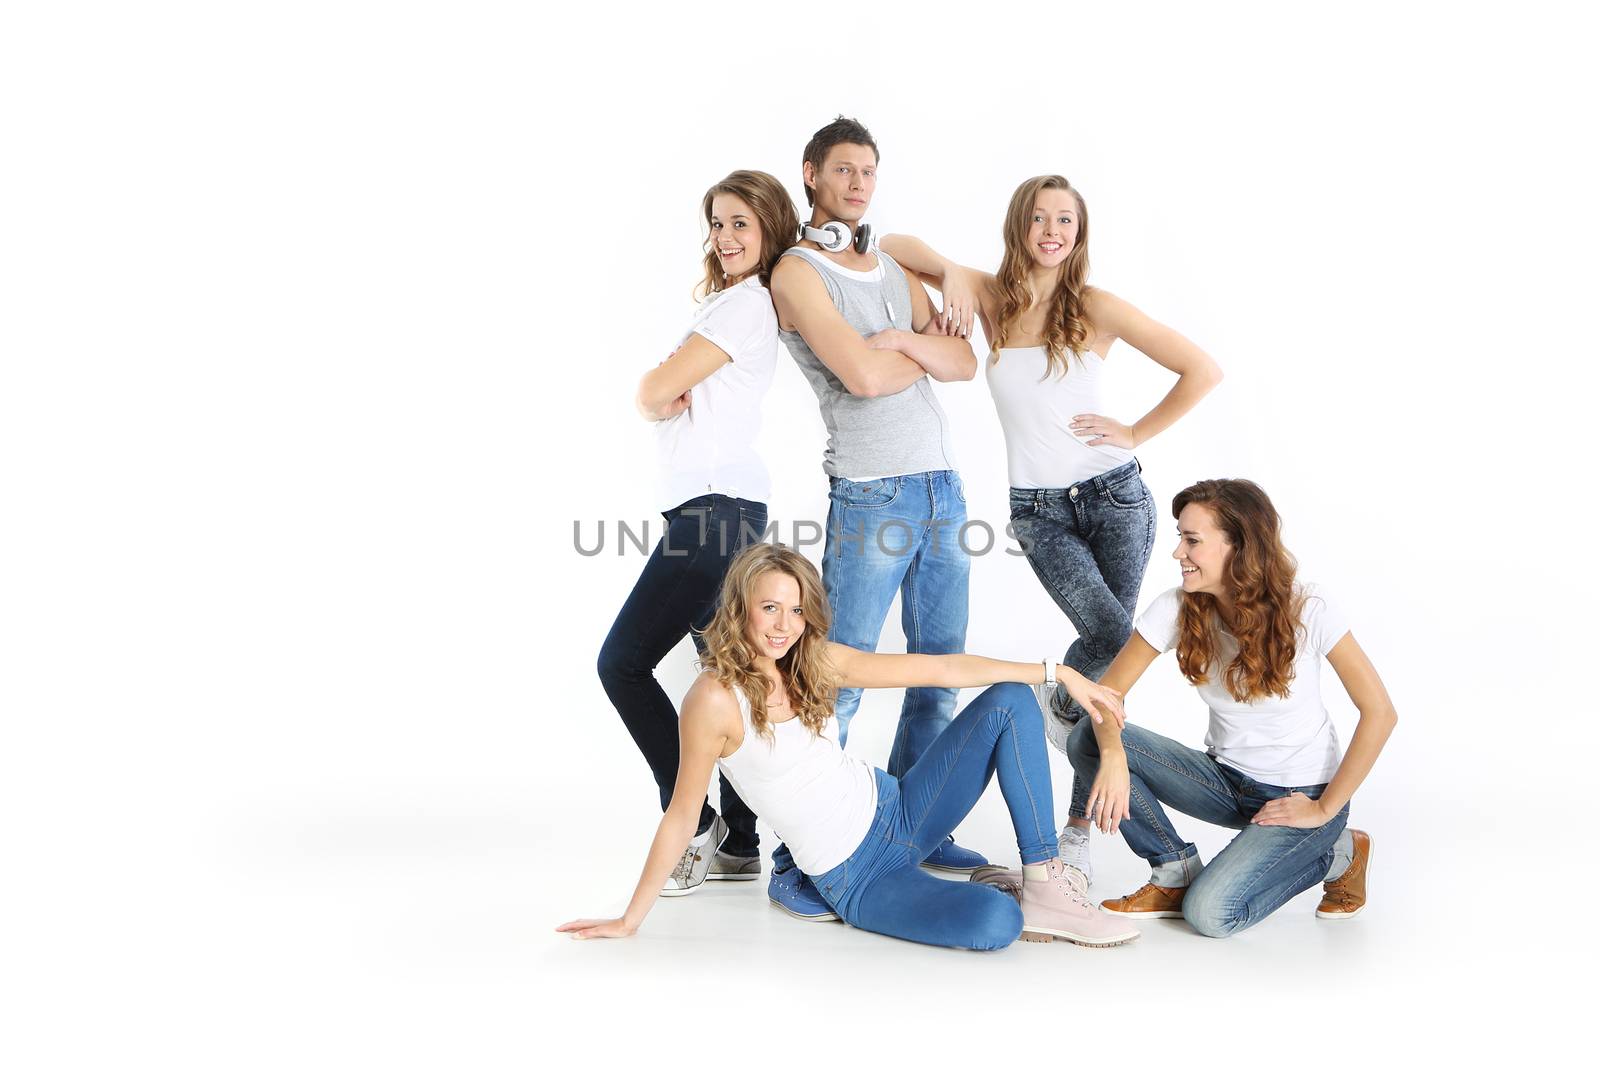 The team of young people three girls and a boy stand on a white background